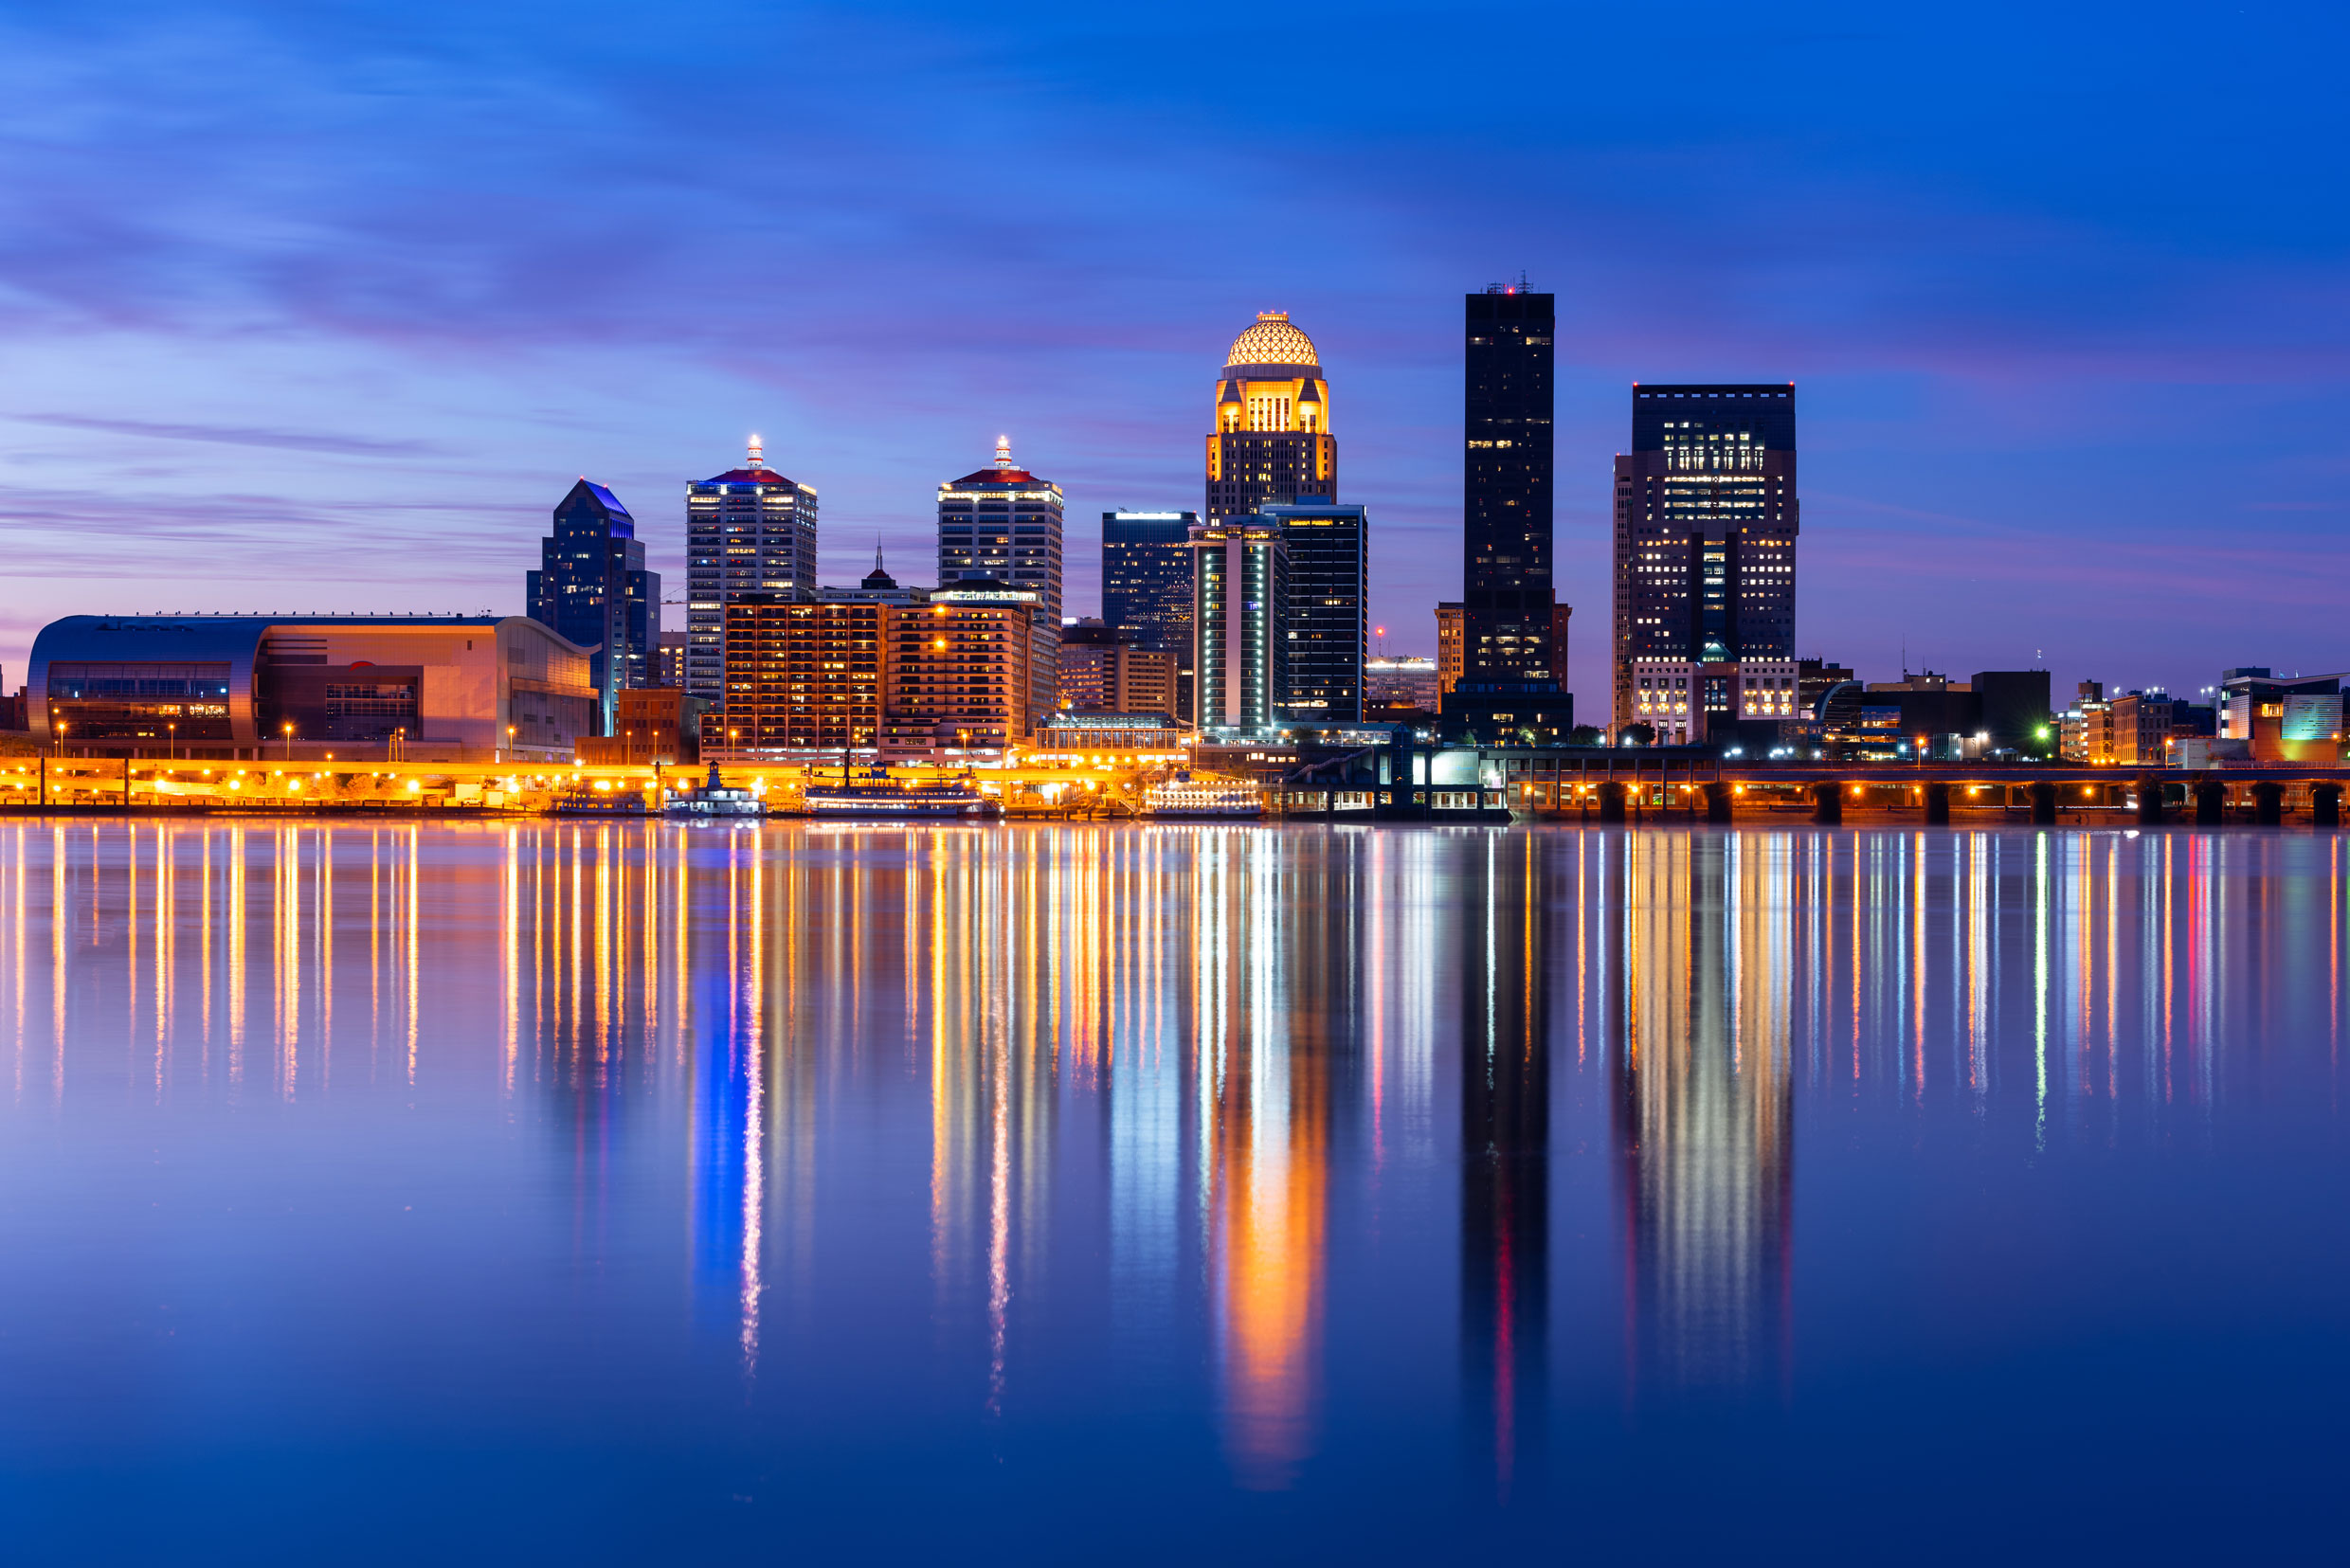 The Louisville, Kentucky skyline at night with lights reflecting off the Ohio River.